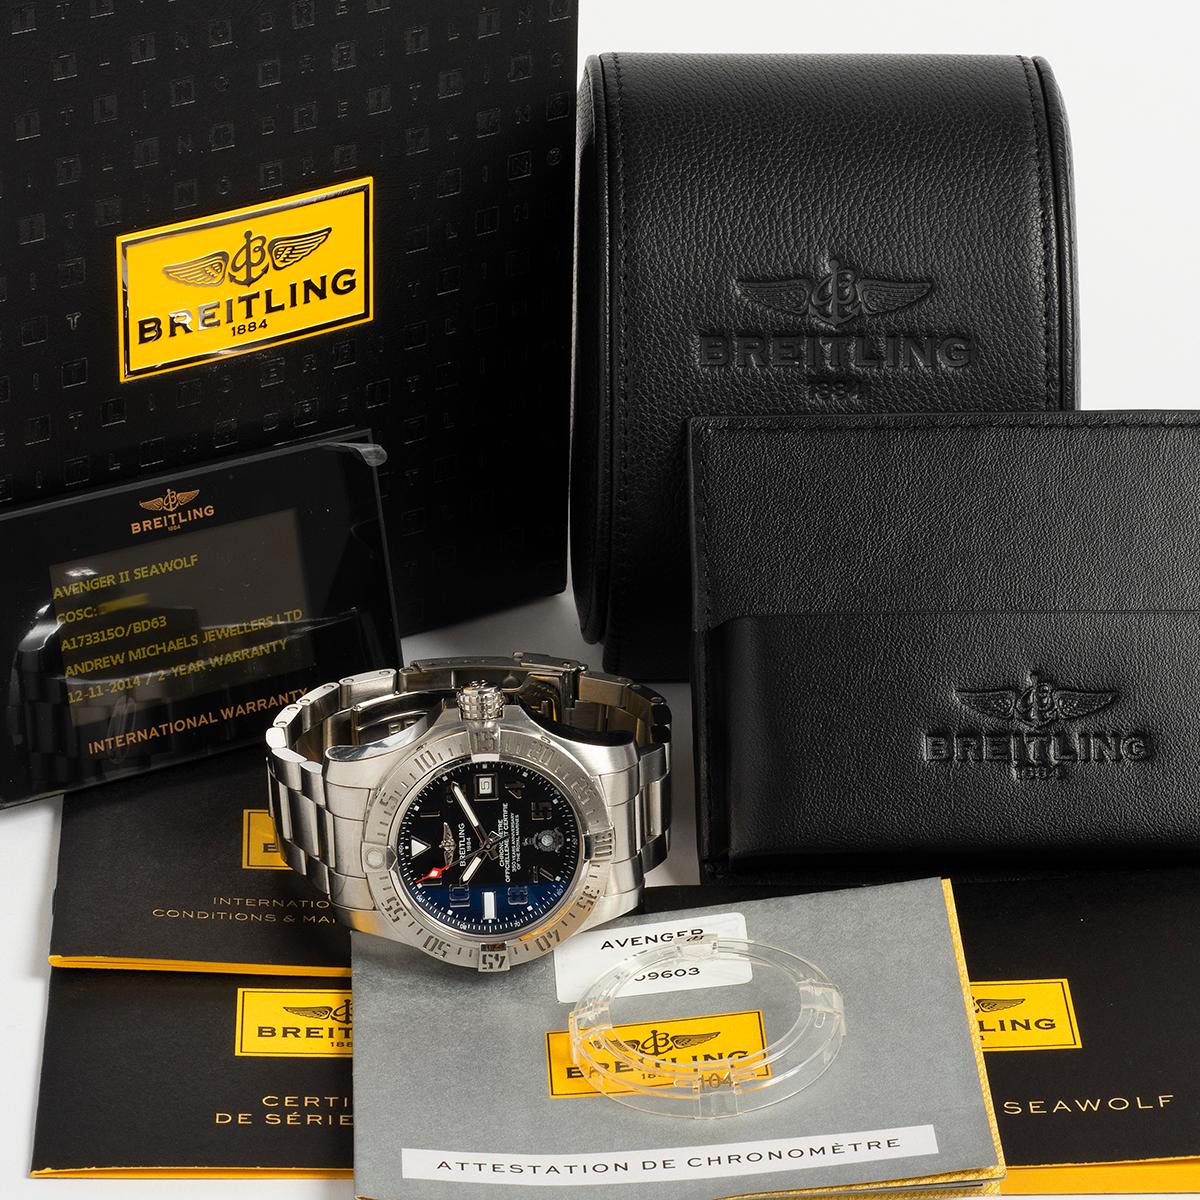 This Breitling Avenger II Seawolf is a limited edition of only 350 pieces to commemorate 350 years of the Royal marines. Featuring a 45mm stainless steel case with caseback engraved with the commemoration as well as individual number of 350 pieces